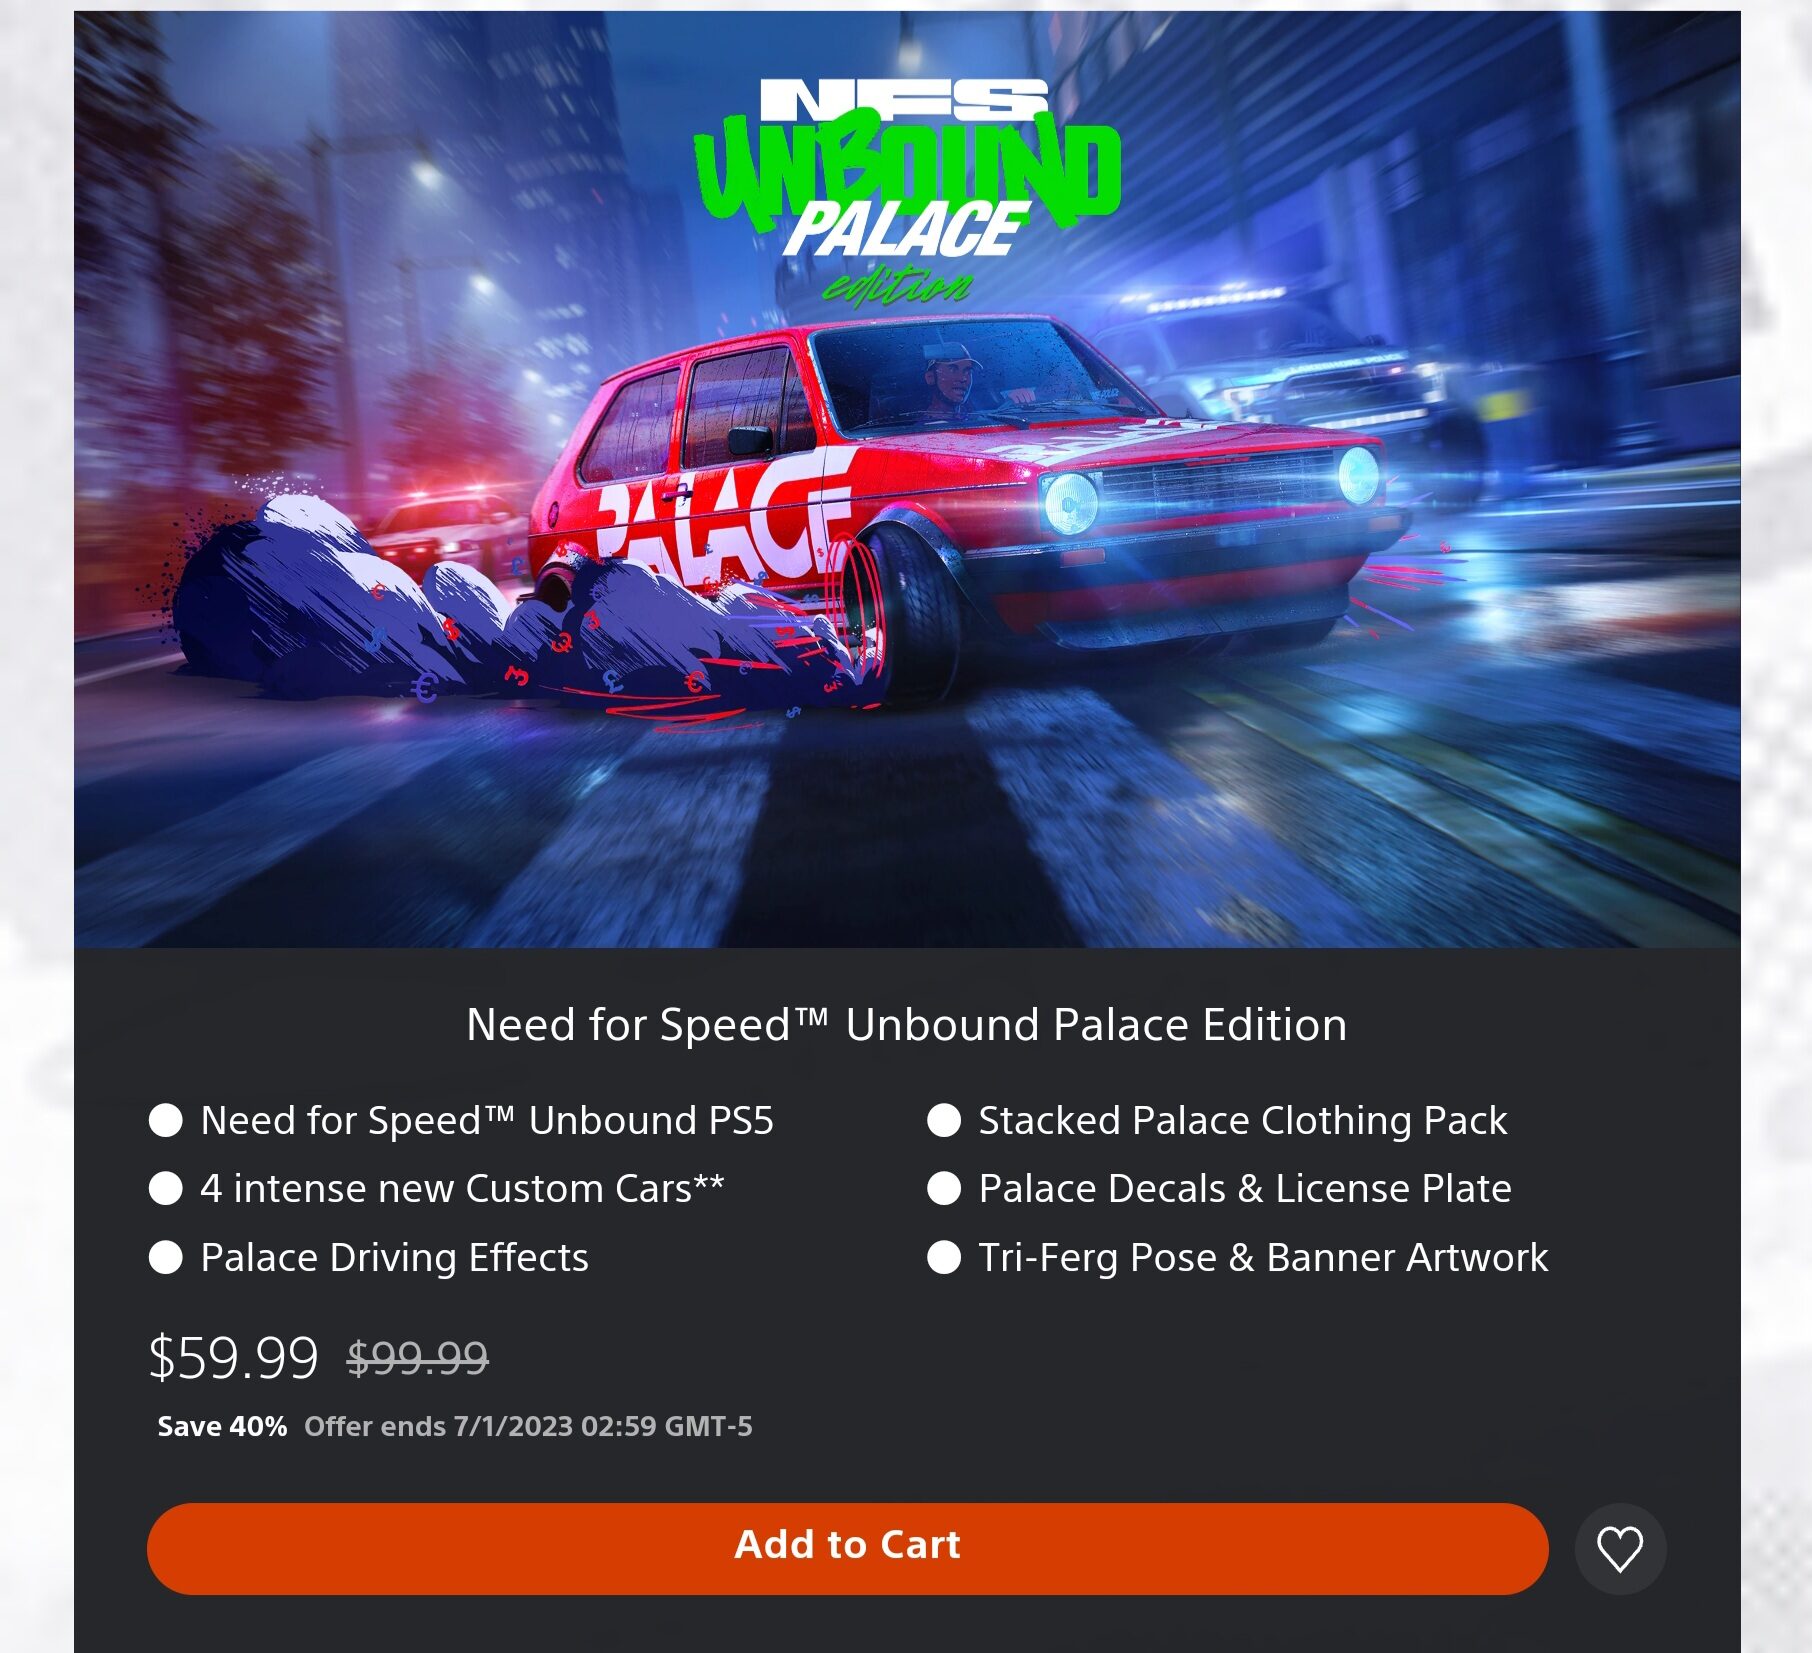 PlayStation Store] NFS Unbound Palace Edition - PS5 Digital - $59